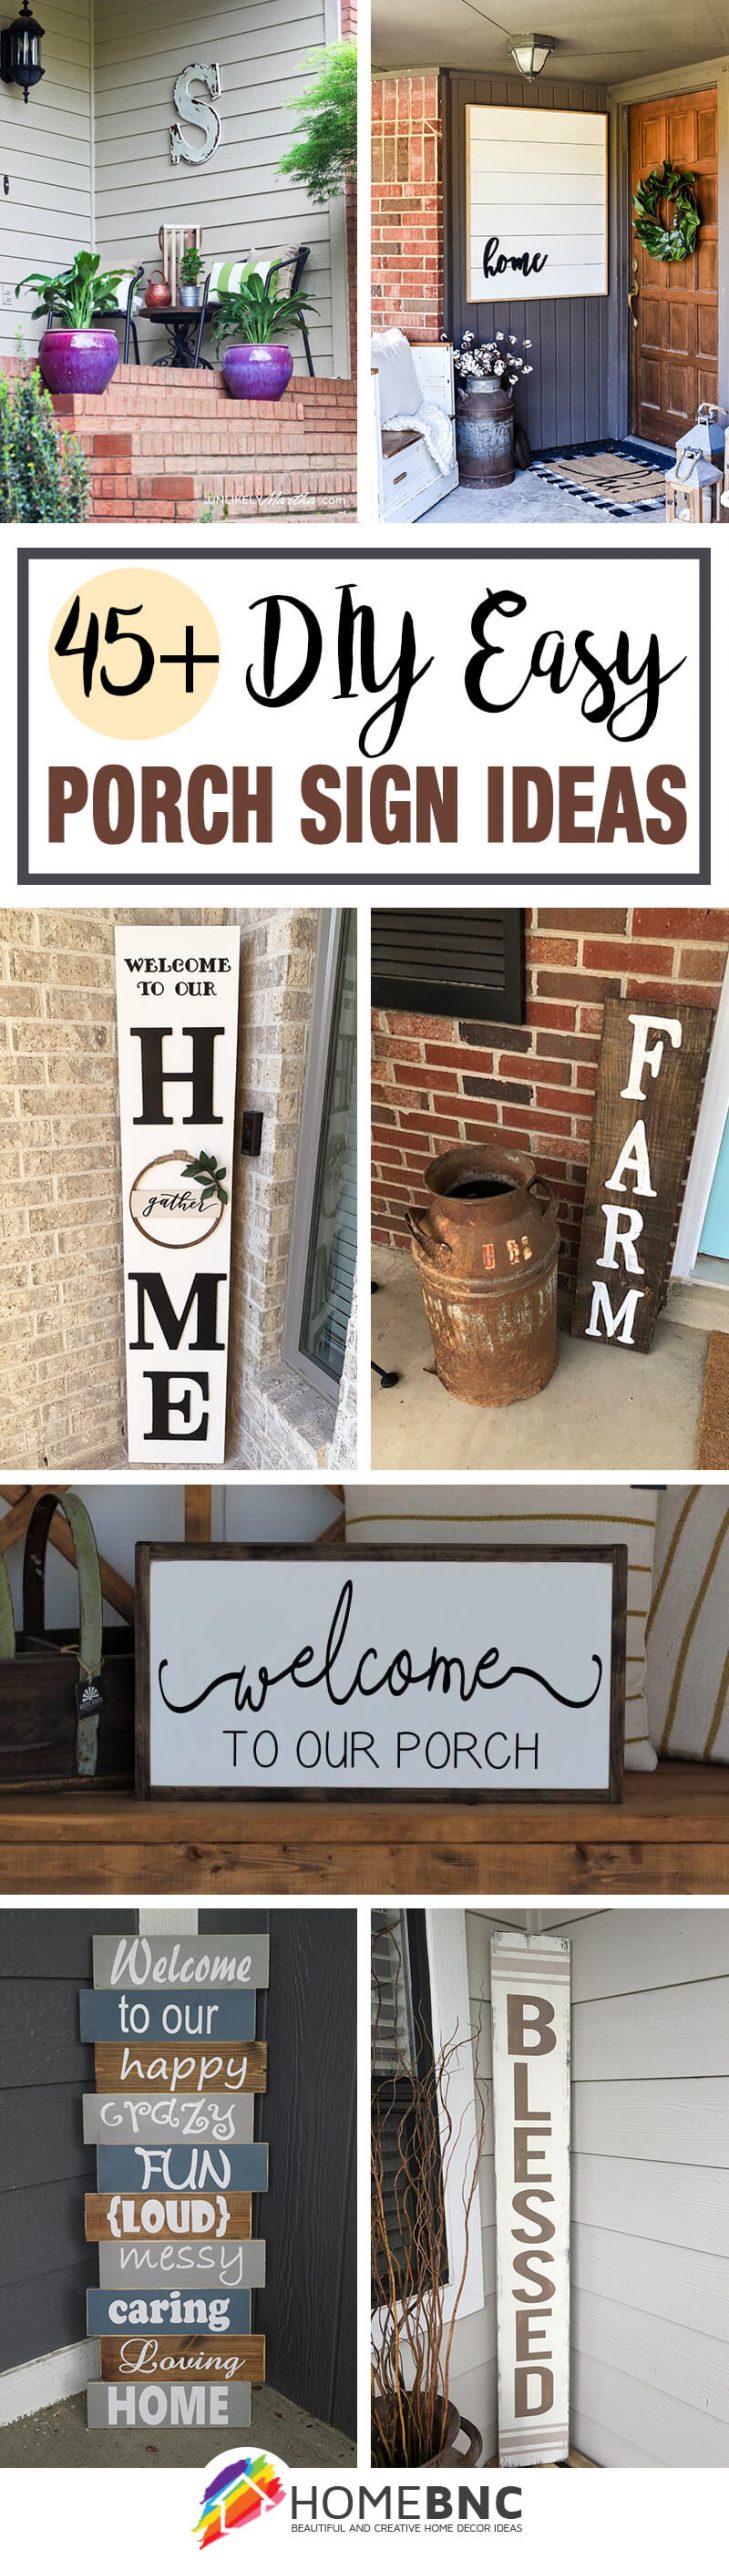 Front Porch Sign Ideas and DIY Projects